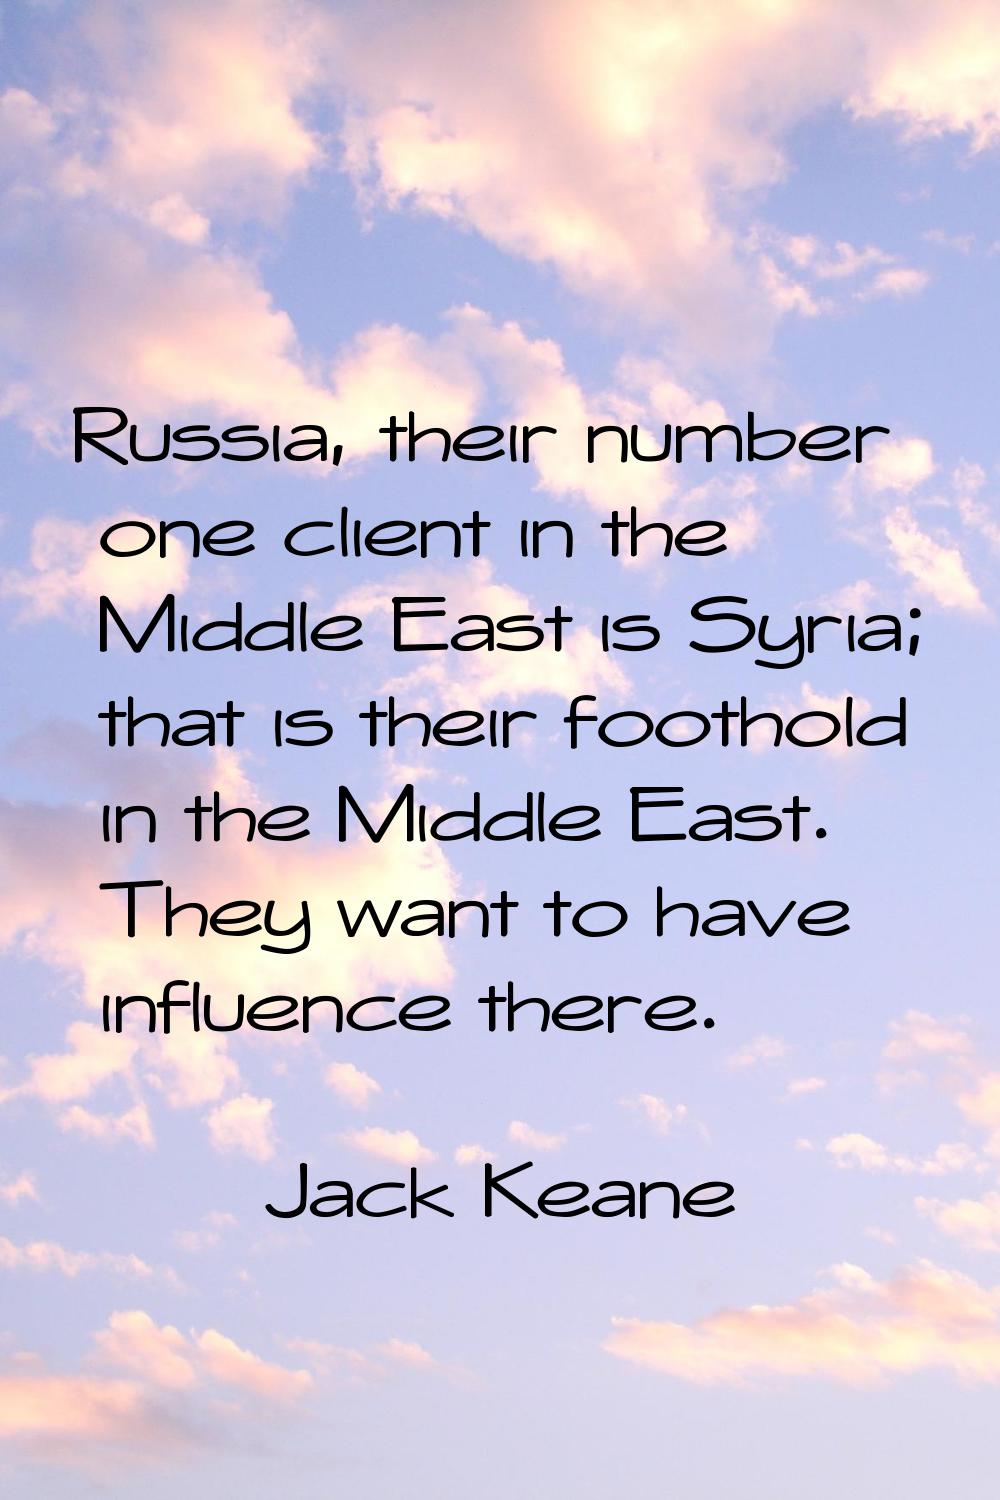 Russia, their number one client in the Middle East is Syria; that is their foothold in the Middle E